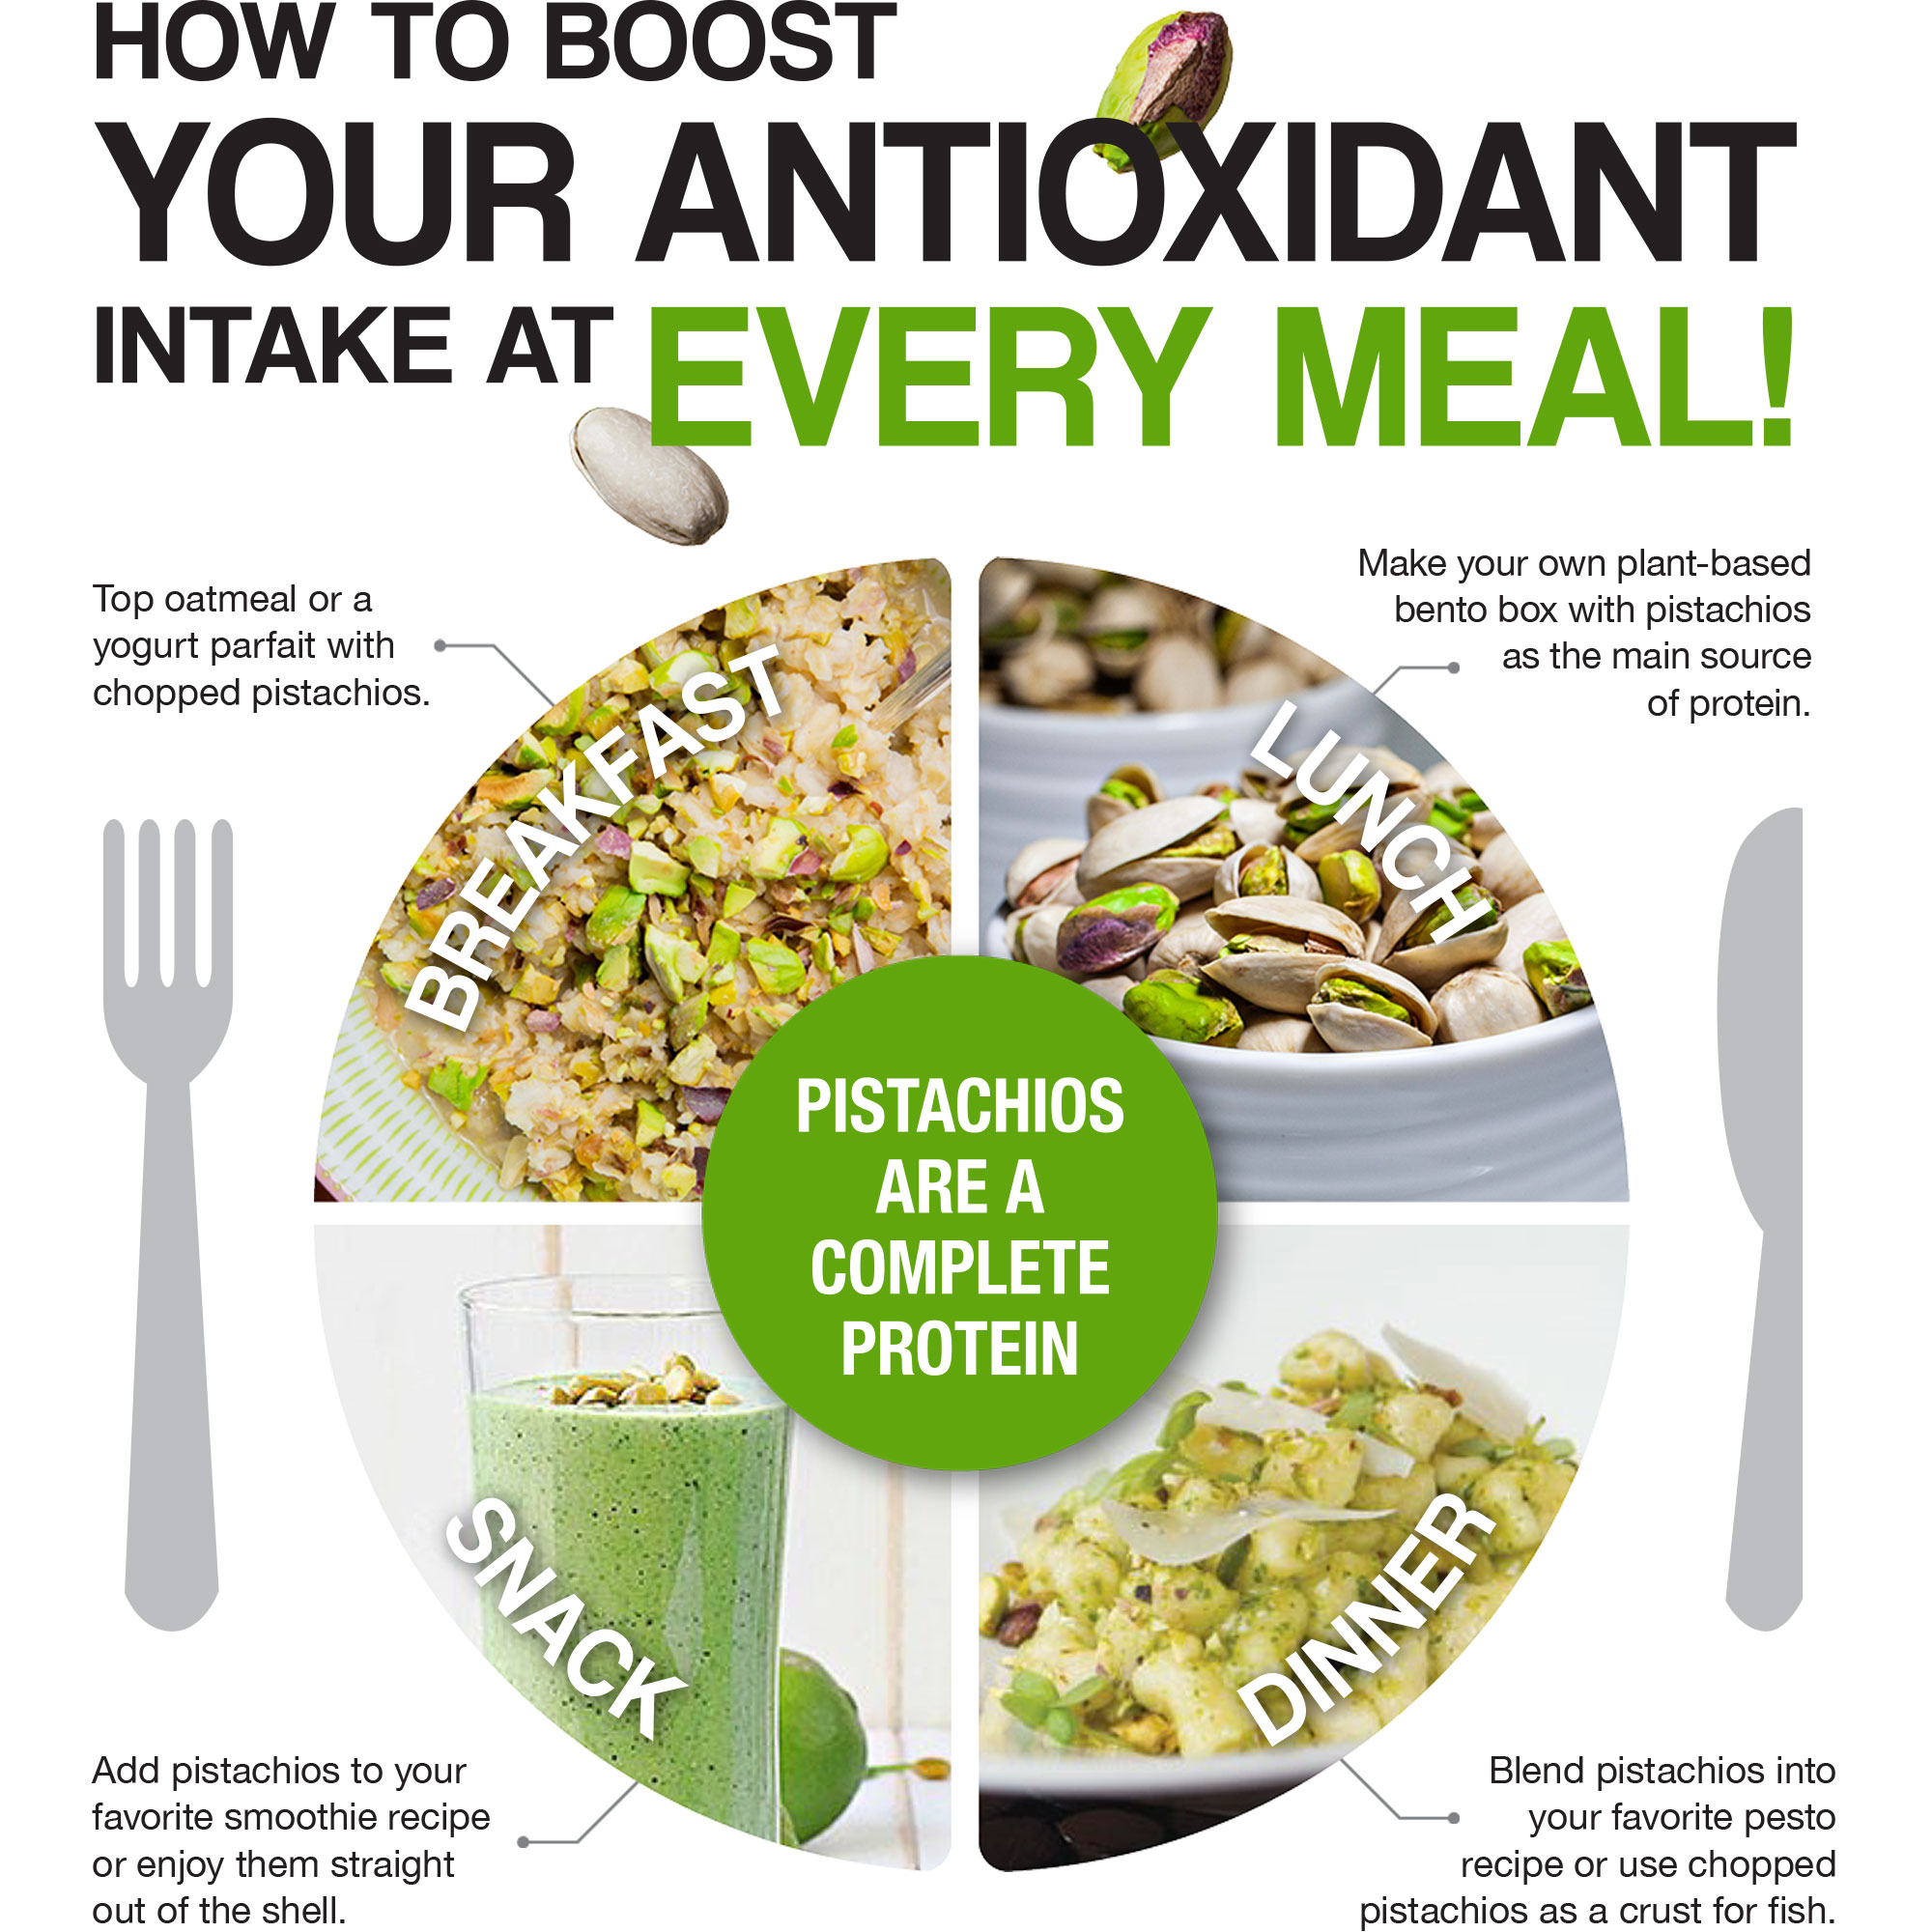 How to Boost Your Antioxidant Intake